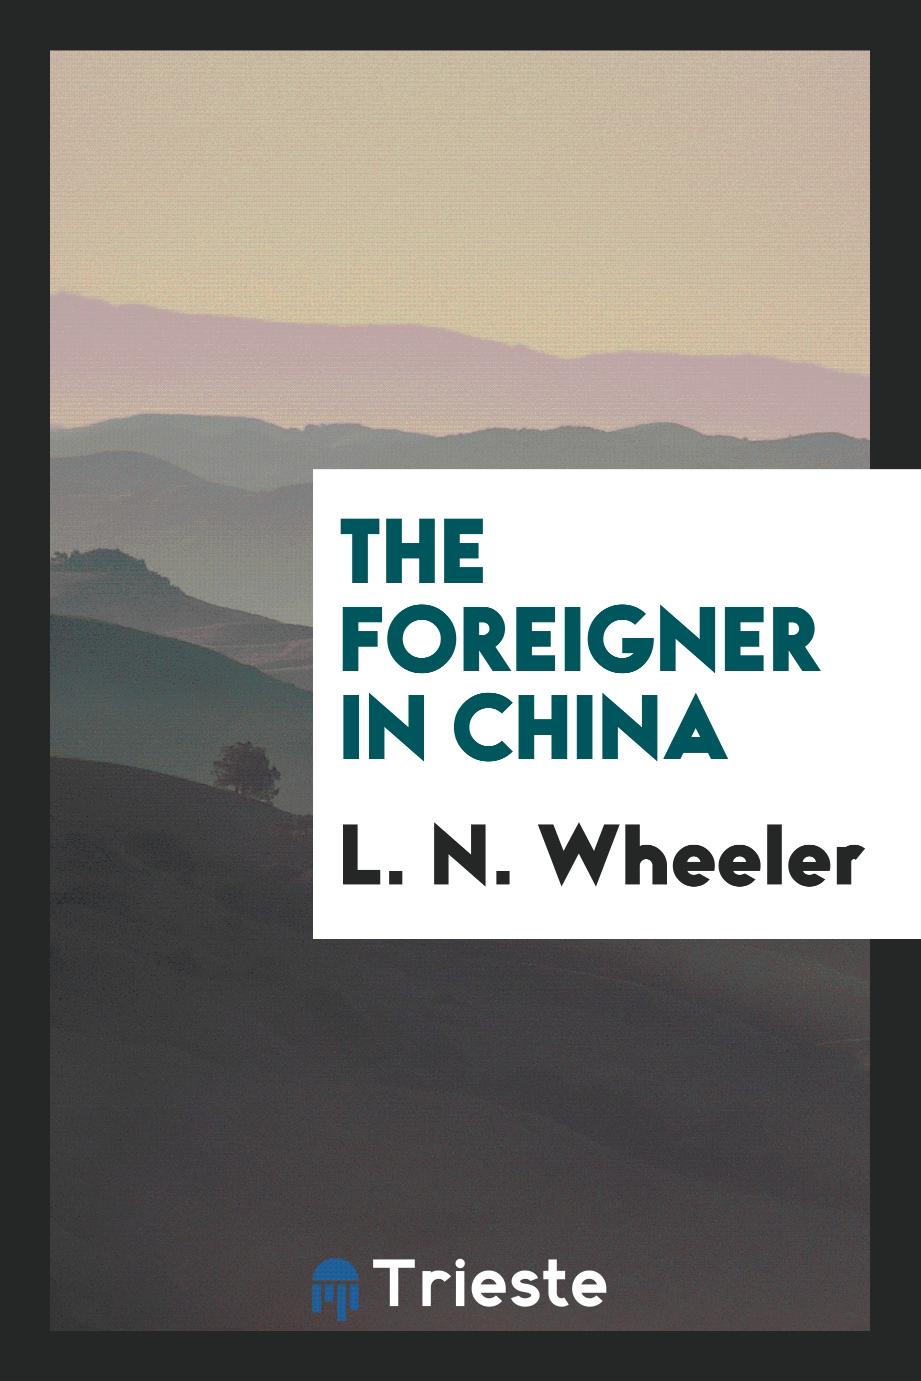 The foreigner in China